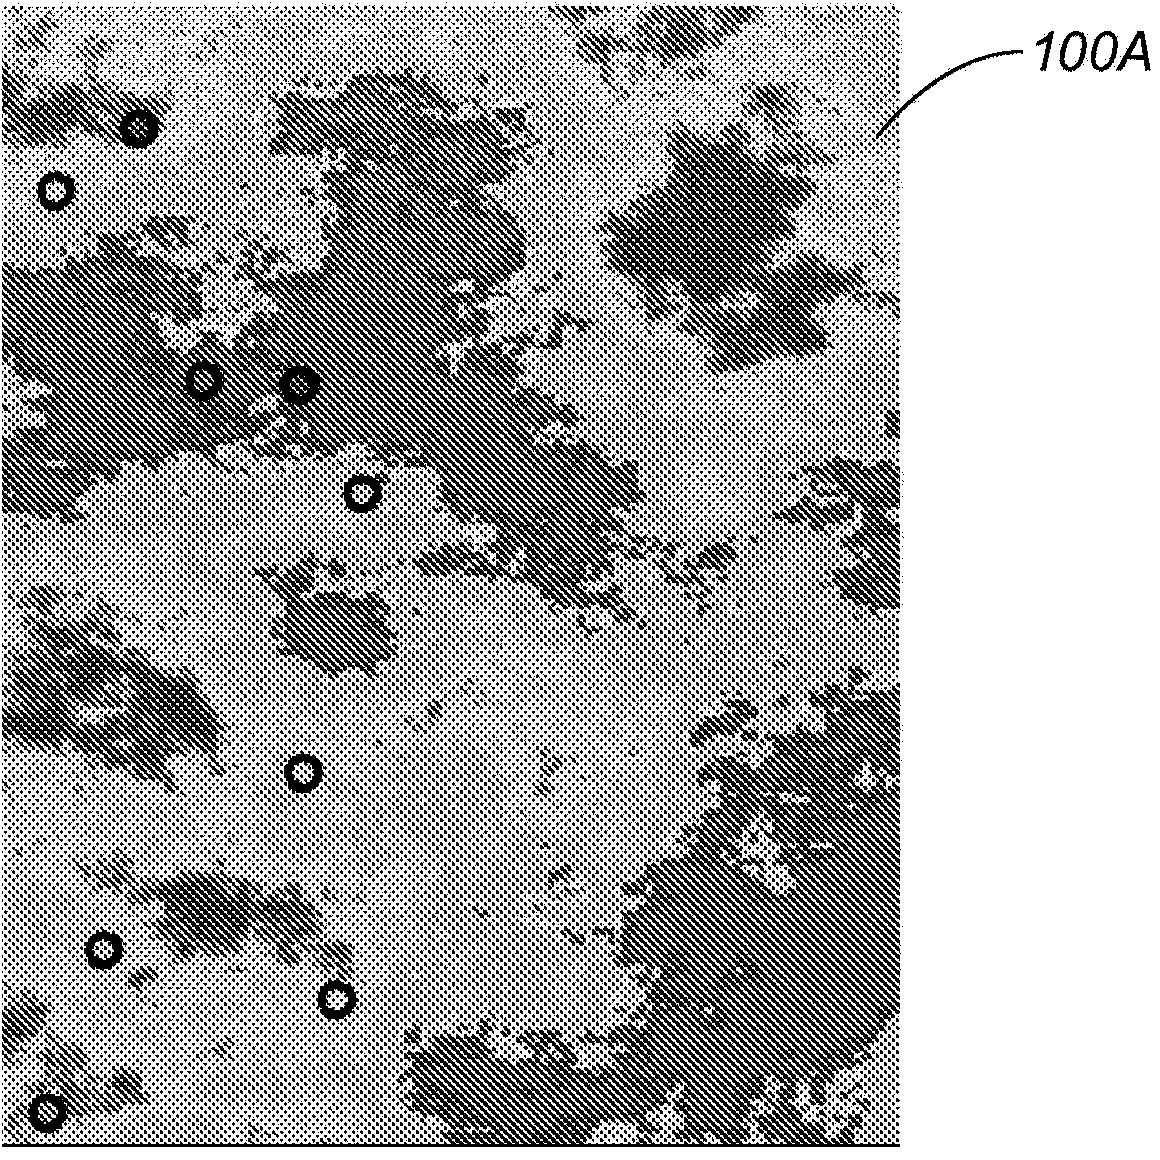 Systems and methods for assisted property modeling